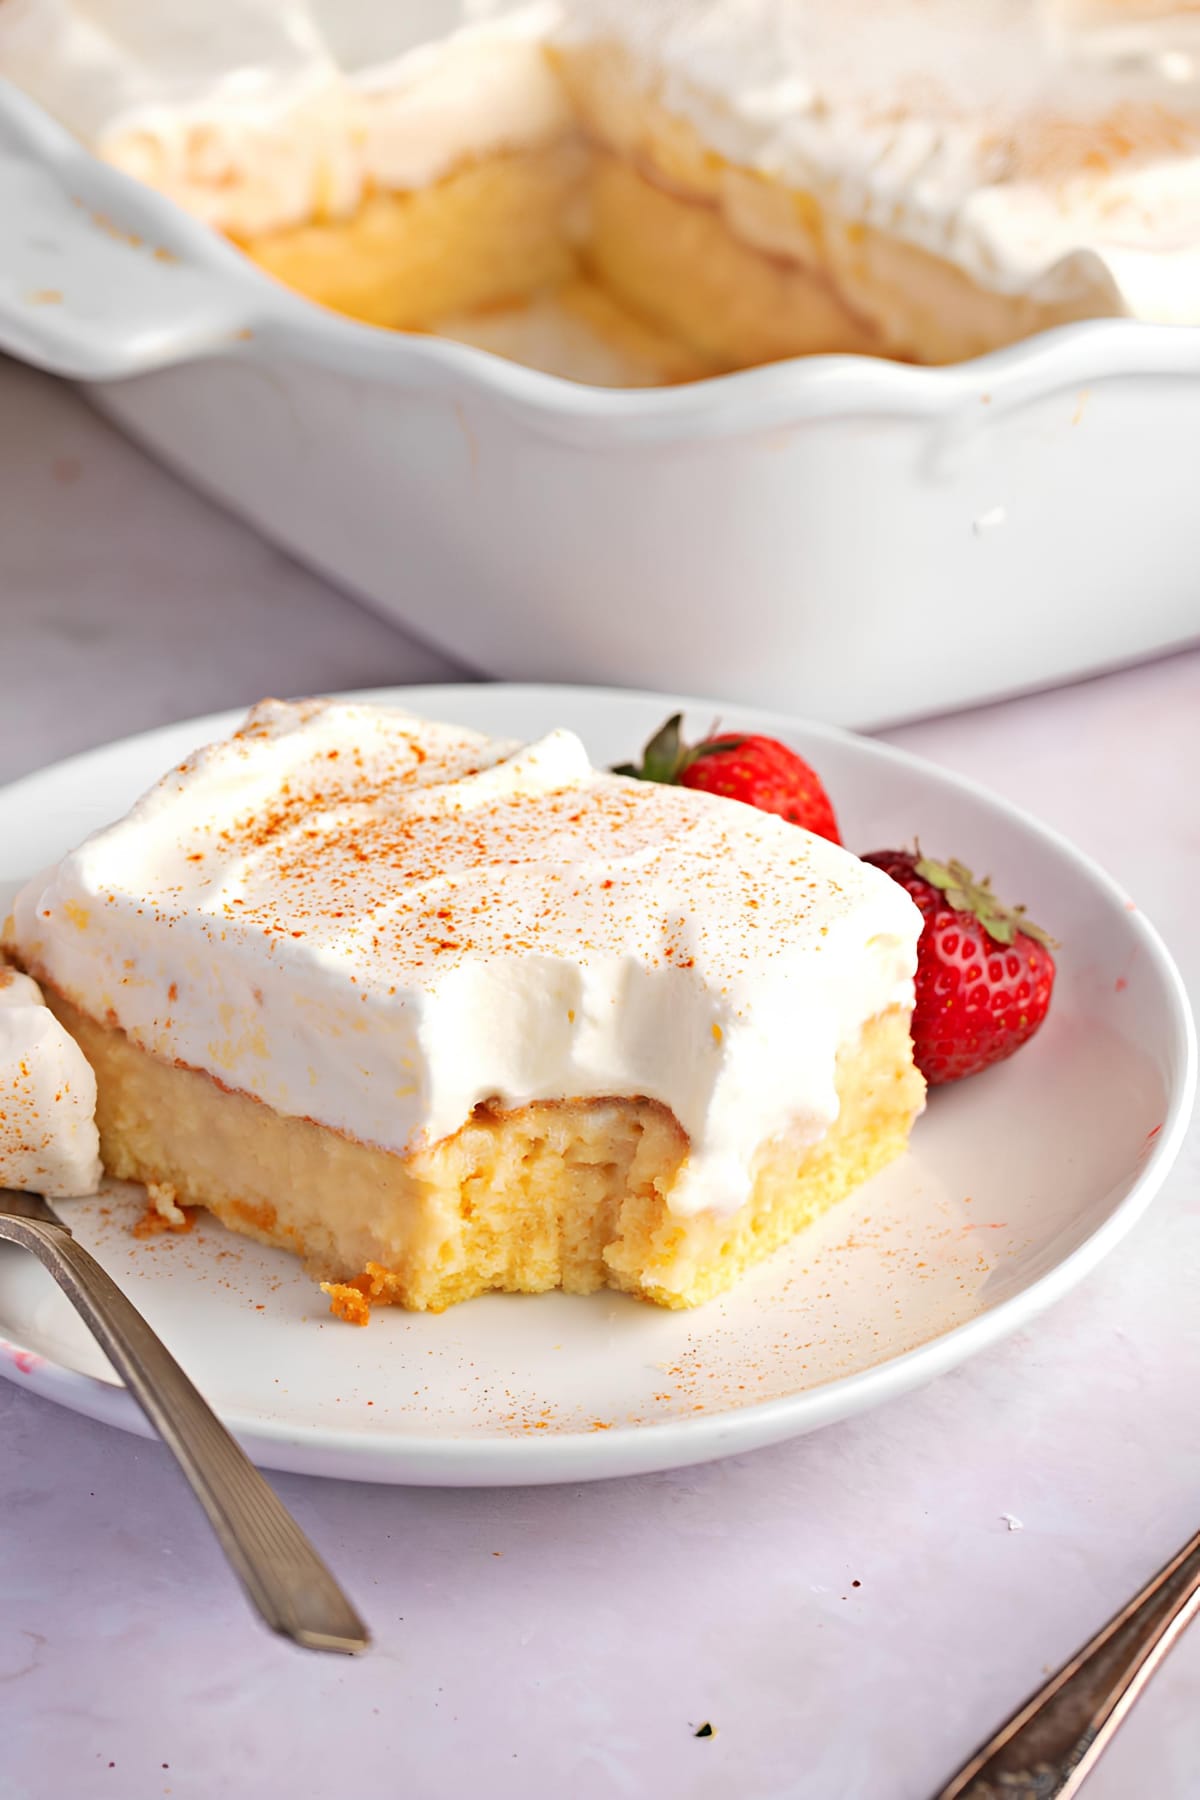 Pastel de Tres Leches (3 Milks Cake) featuring A plate of pastel de tres leches with a fork and strawberries, perfect for indulging in a sweet treat